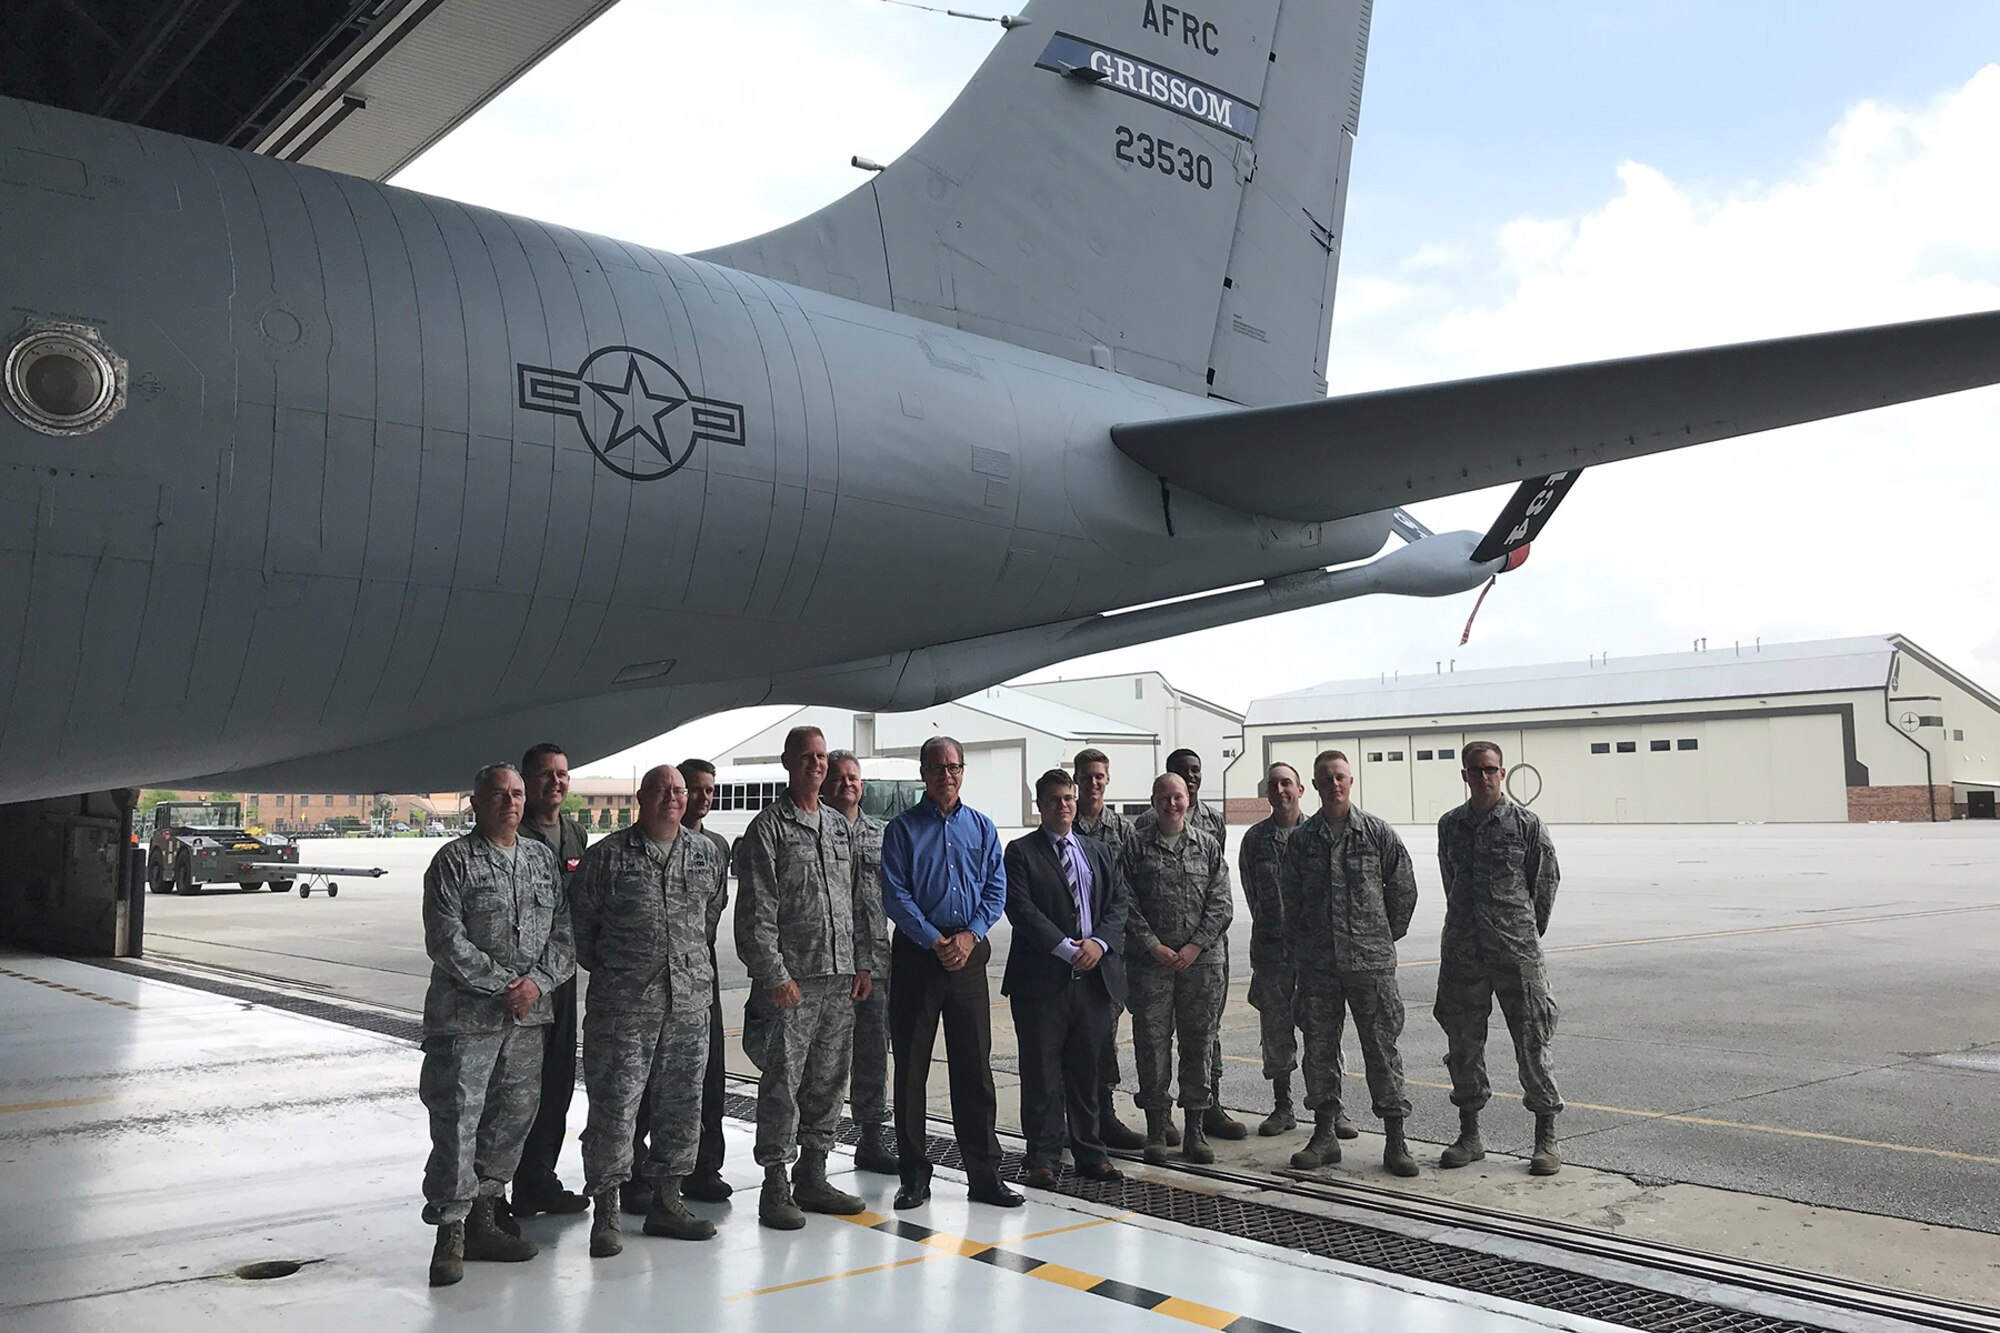 Senator Mike Braun (R) Indiana, center, stands with members of the 434th Air Refueling Wing during a visit to Grissom Air Reserve Base, Ind., May 28, 2019. The visit was the first for the first-term senator, and was designed to give him a personal view of the base and its mission. (U.S. Air Force photo/Douglas Hays)